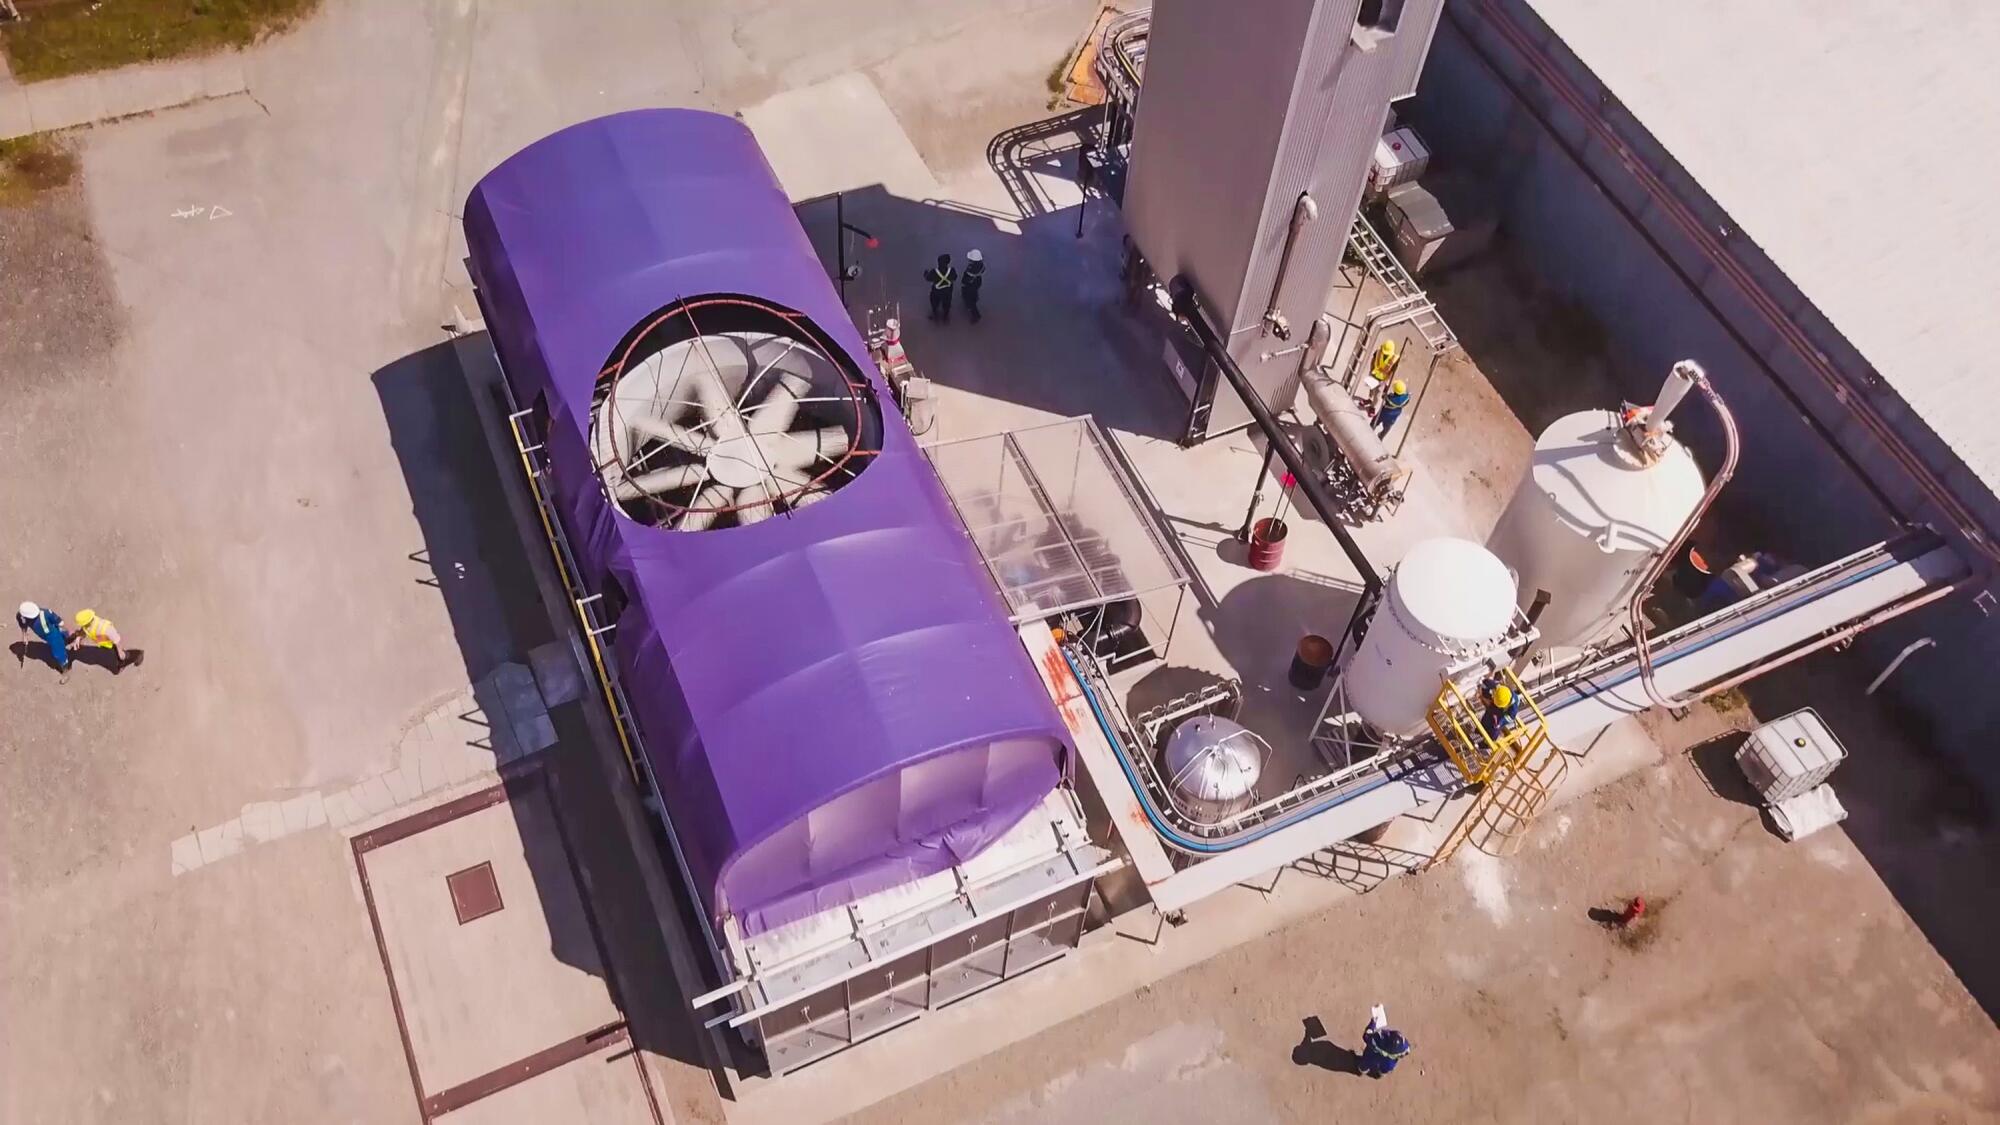 A giant fan is visible in an aerial view of an industrial plant.